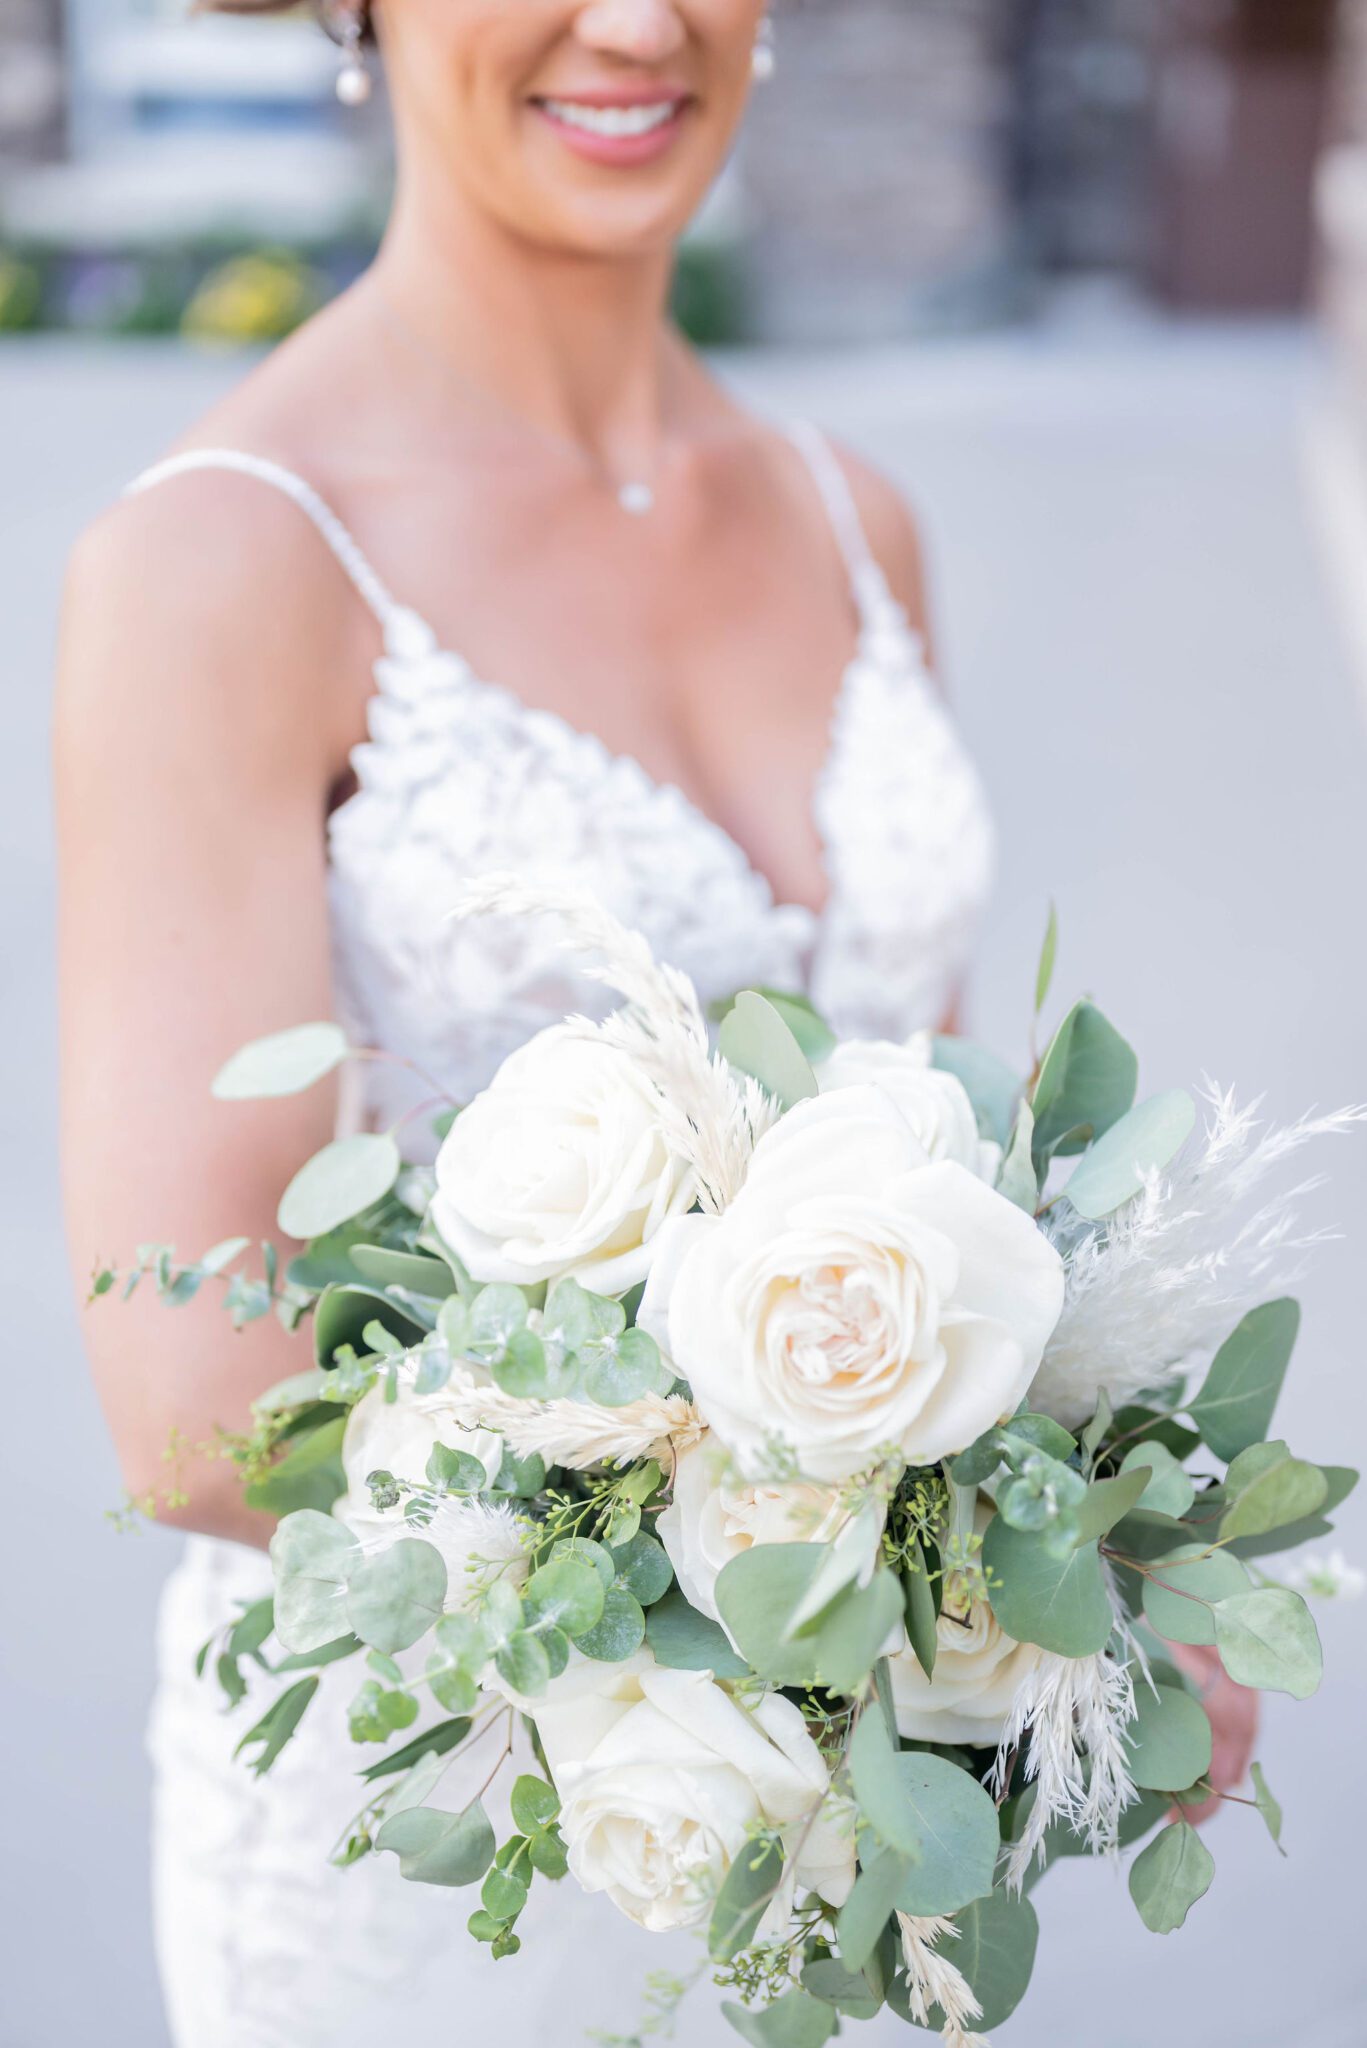 Bride in lace gown holding white floral bouquet with greenery, summer wedding inspiration. 